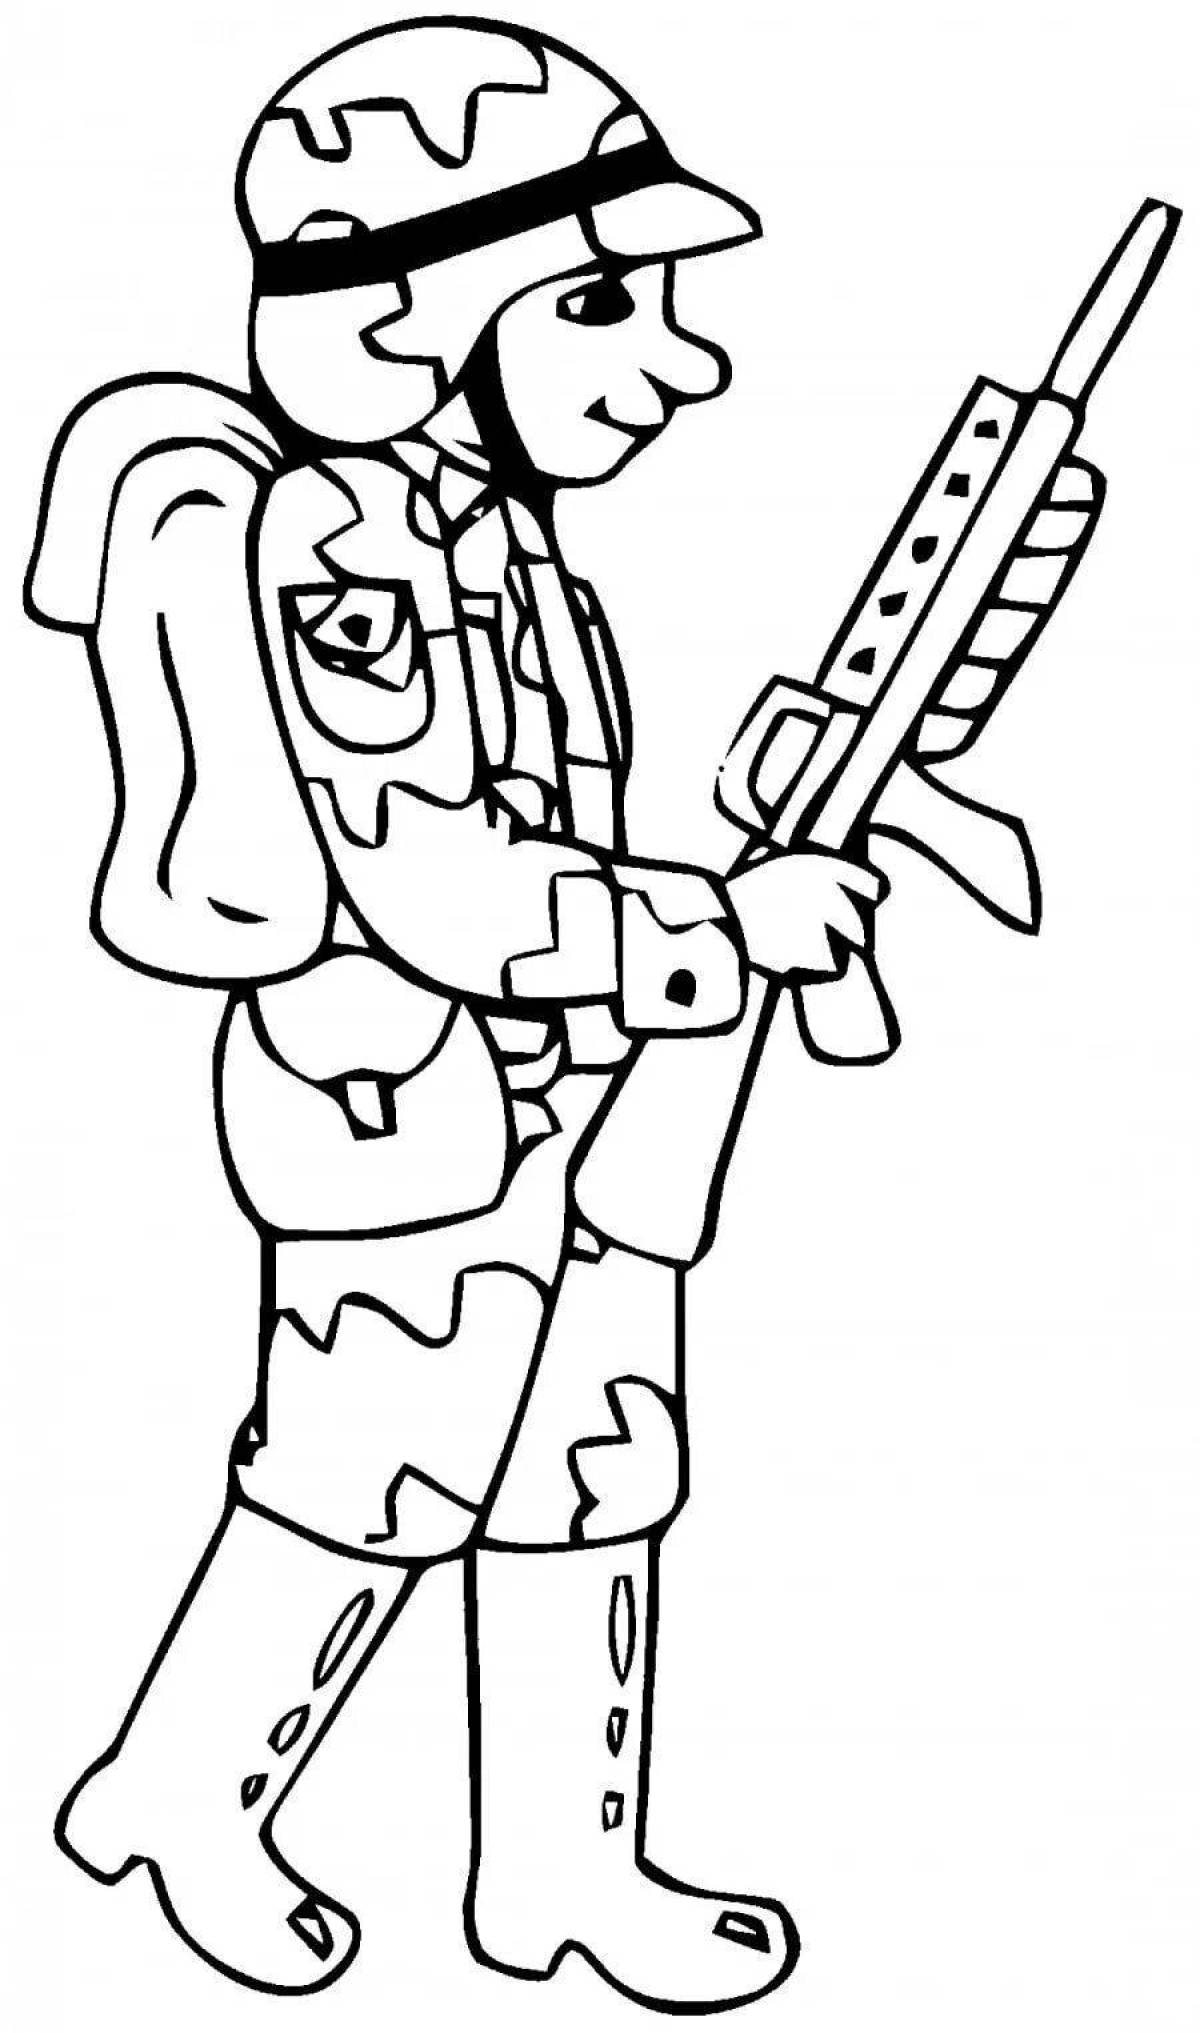 Charming toy soldier coloring book